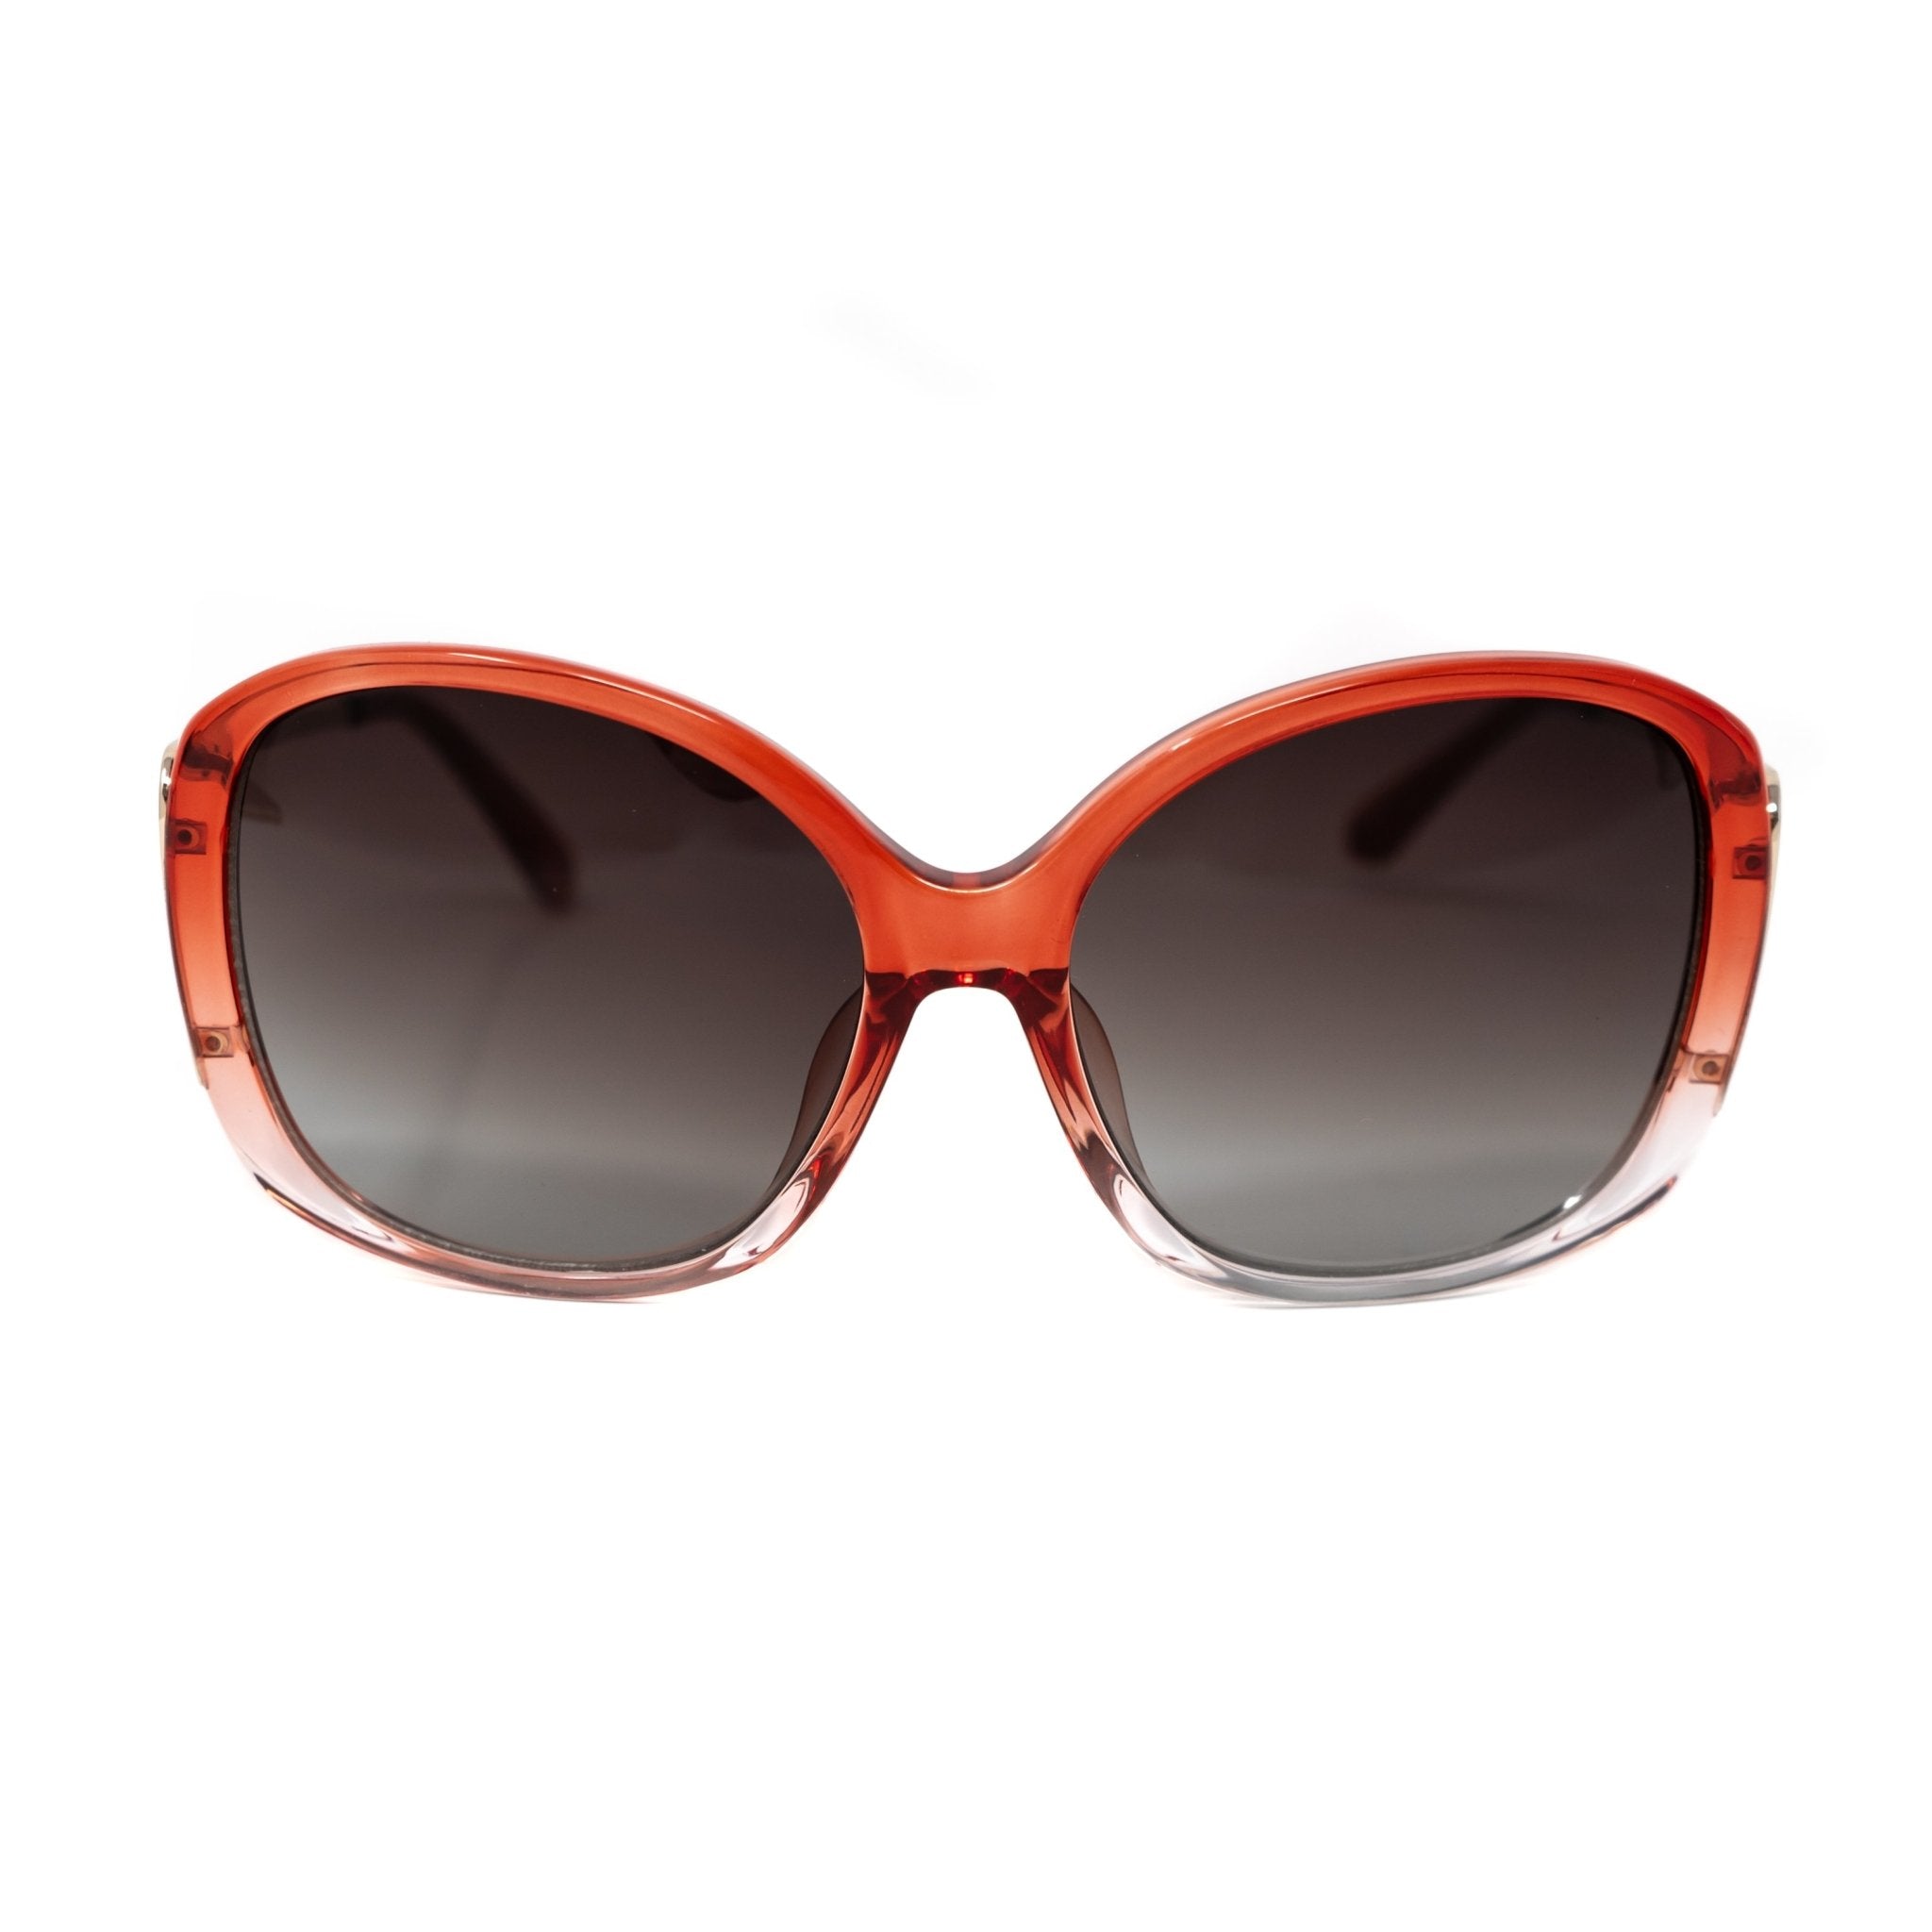 Prabal Gurung Sunglasses Oversized Female Red to Clear/Light Gold Frame Category 3 Grey Graduated Lenses PG23C2SUN - Watches & Crystals